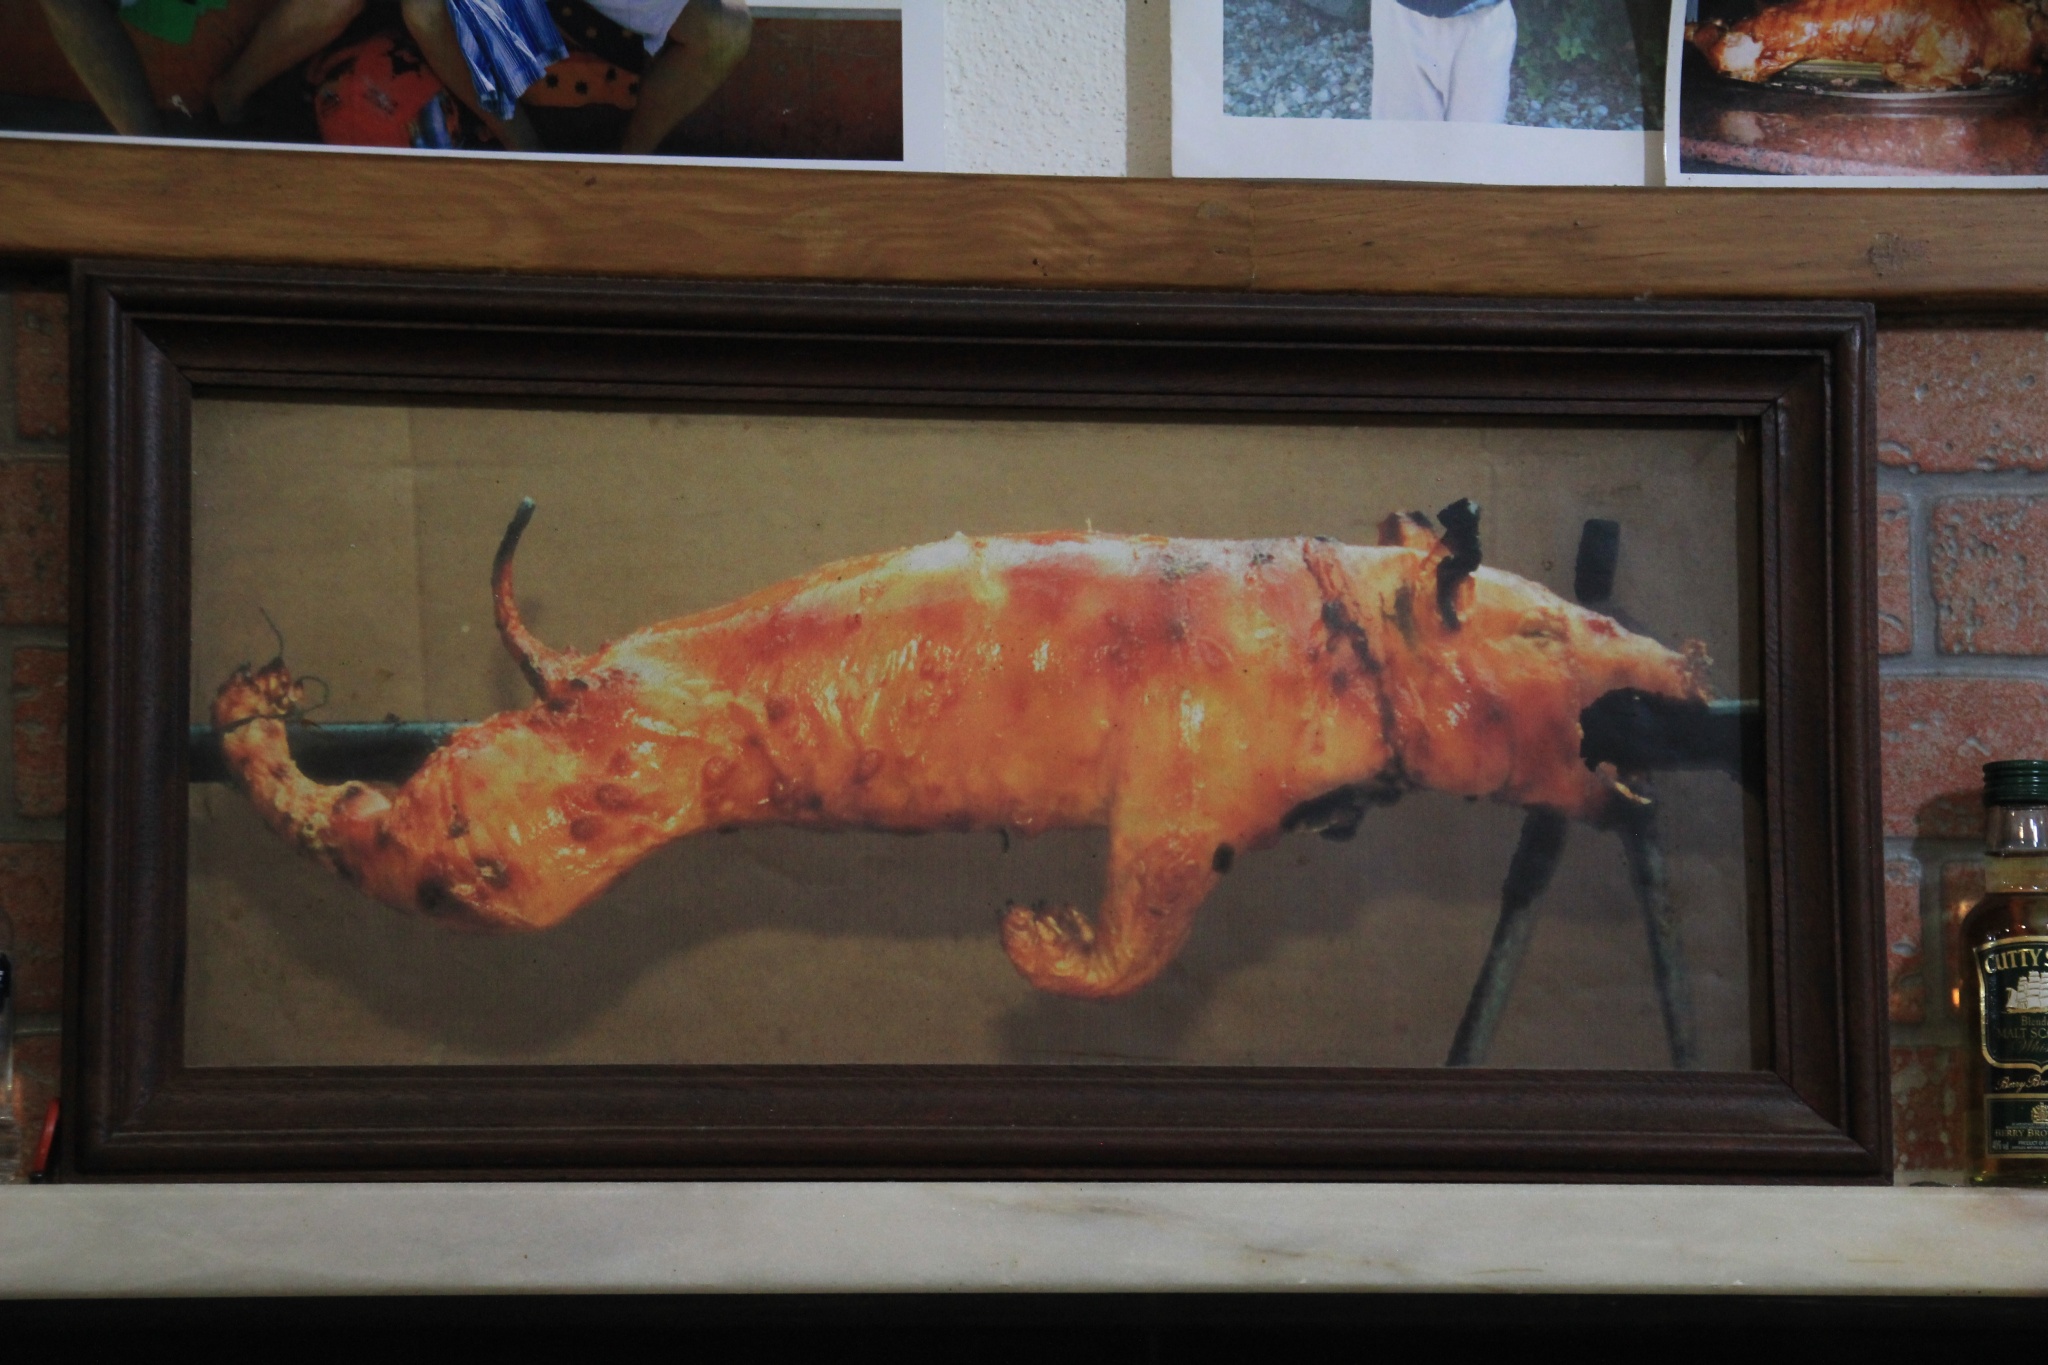 A photograph of a roasting pig sits above customers at the Porta Larga restaurant in Coimbra, Portugal.